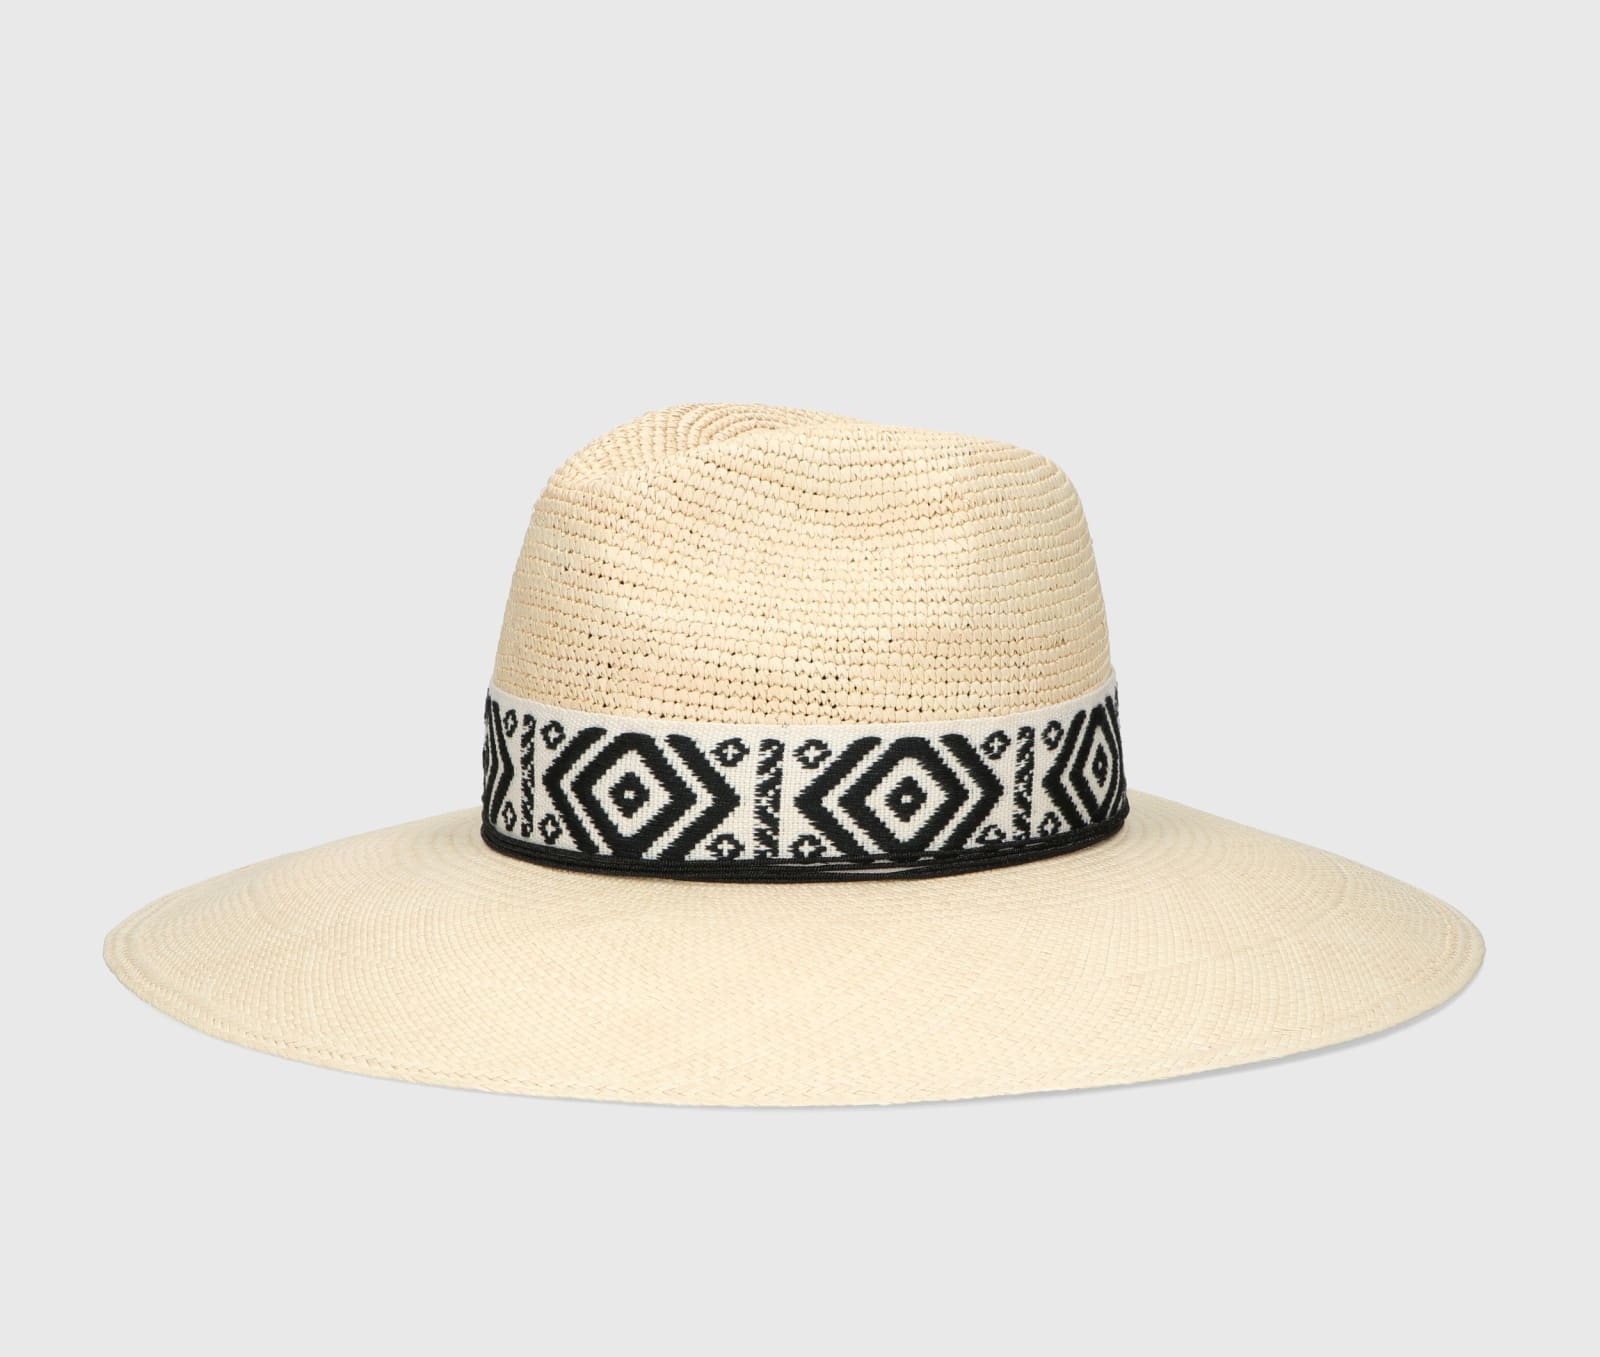 Shop Borsalino Sophie Panama Semicrochet Patterned Hatband In Natural, Patterned Black/cream Hat Band